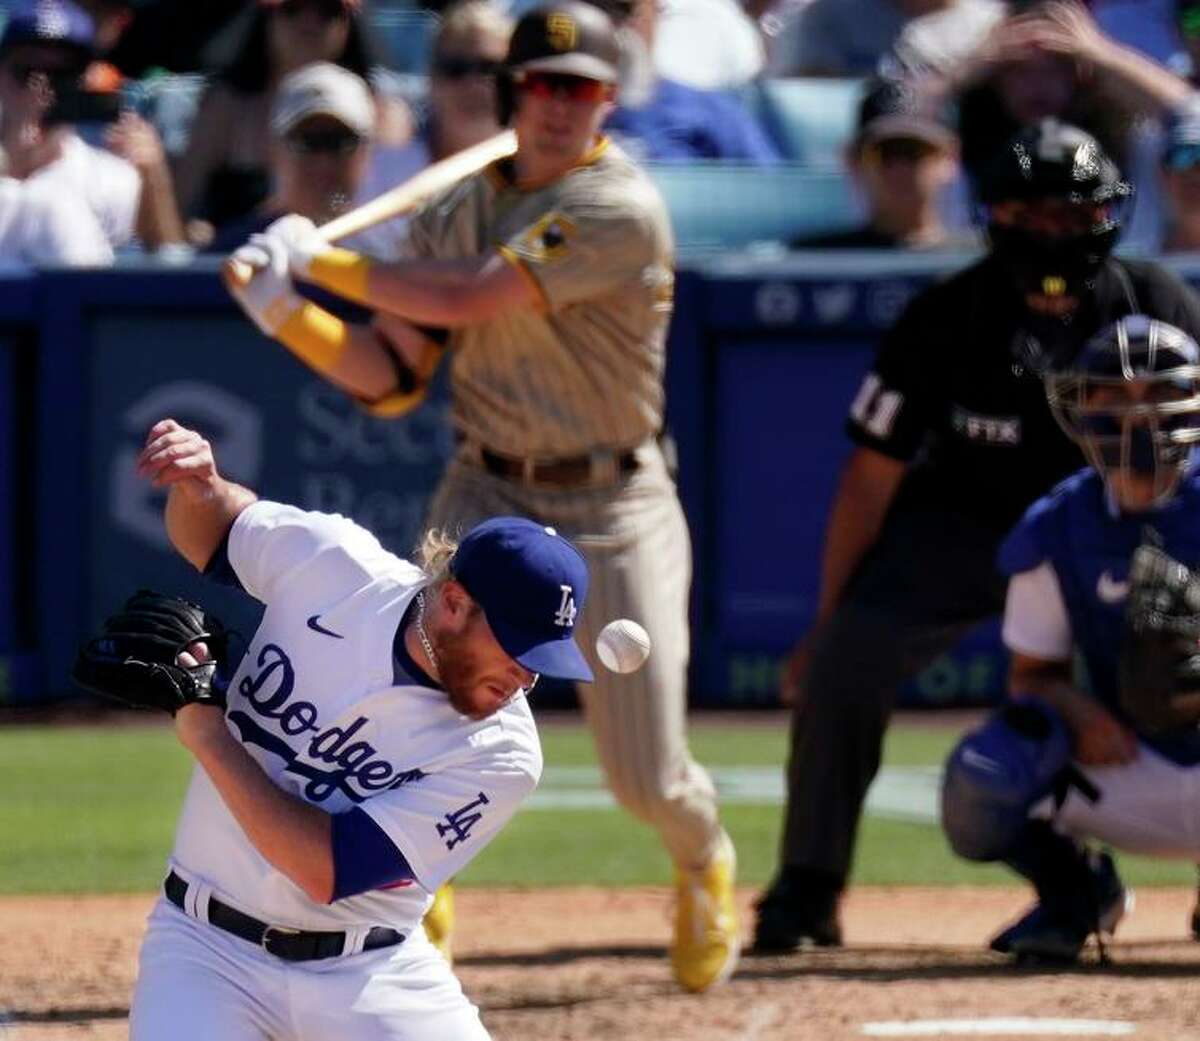 Dodgers pitcher Craig Kimbrel is hit by a liner that became a single for the Padres’ Jake Cronenworth.